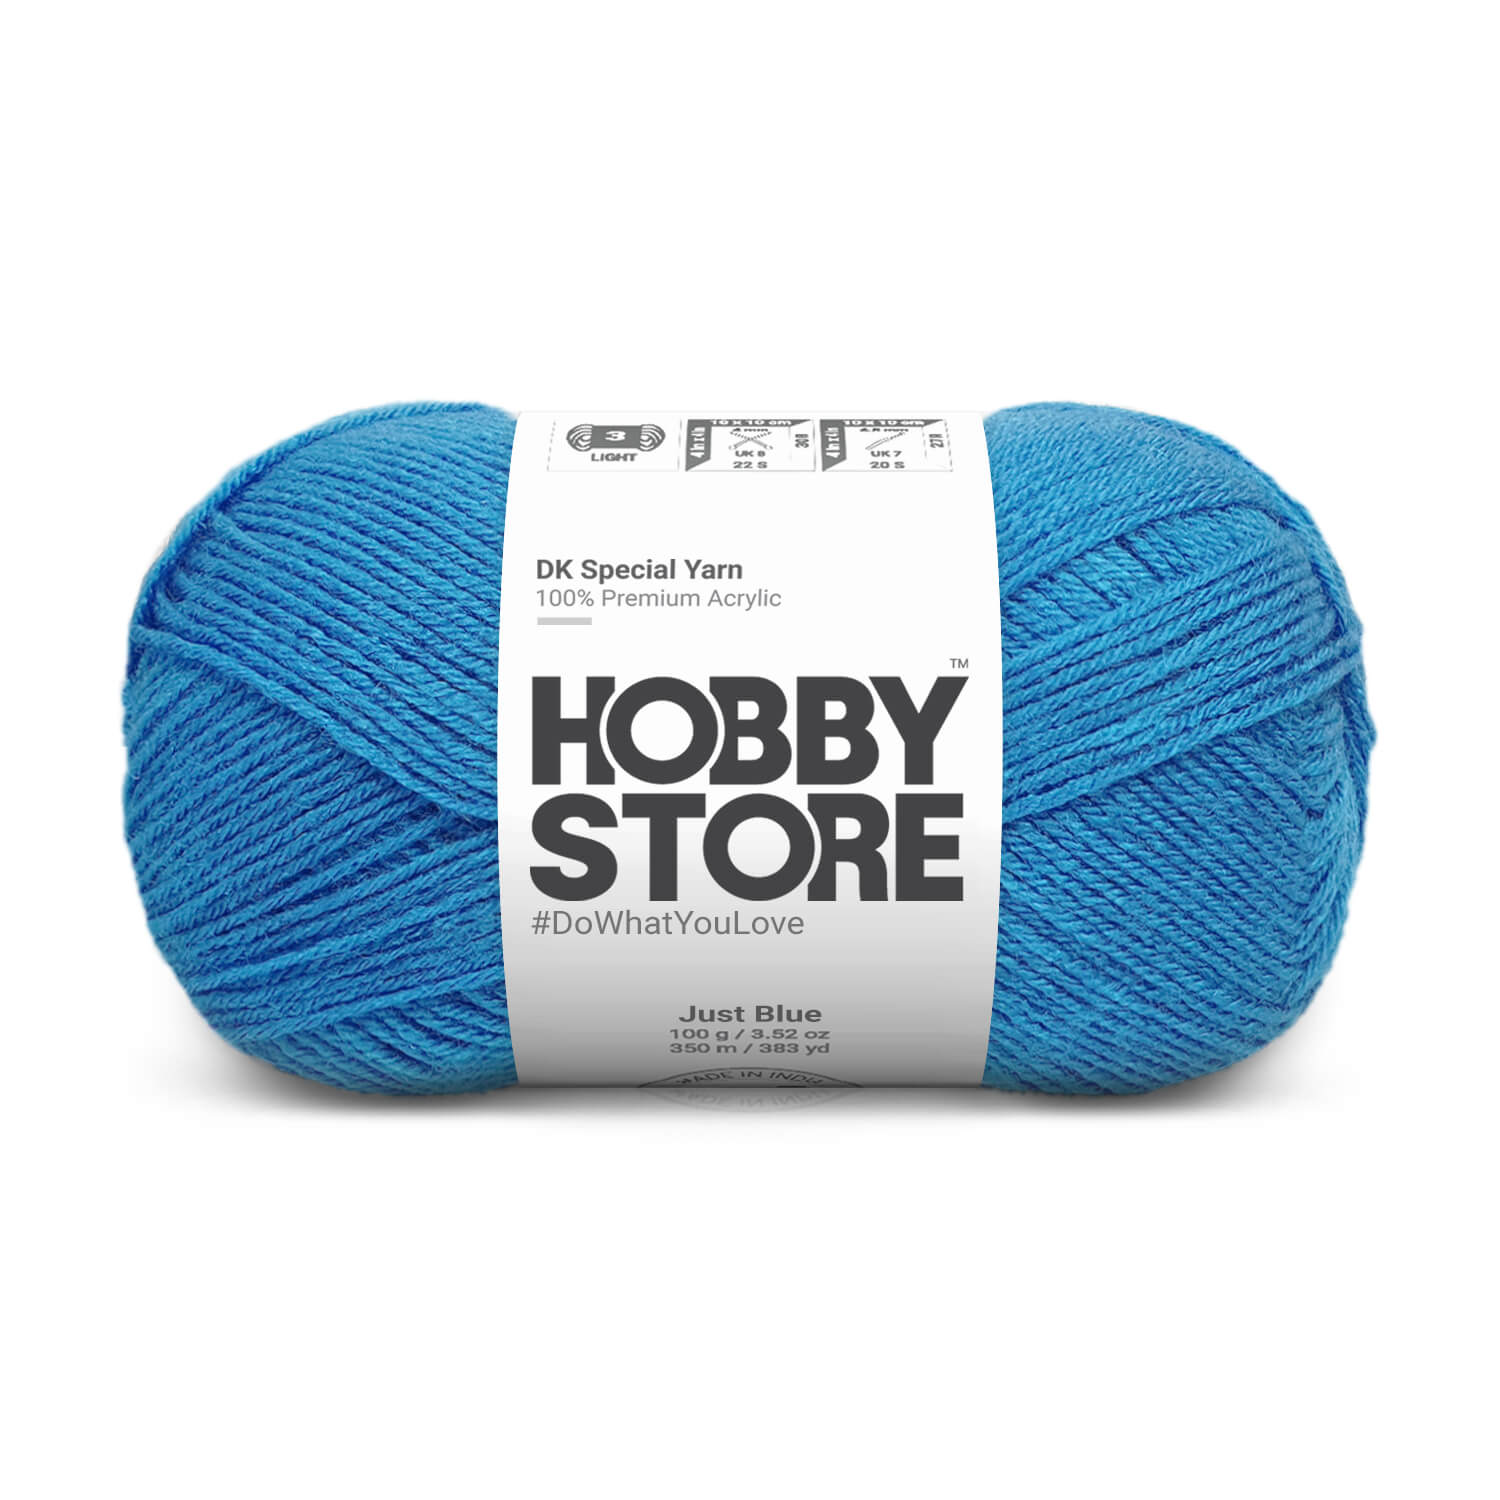 Hobby Store DK Special Yarn - Just Blue 5043